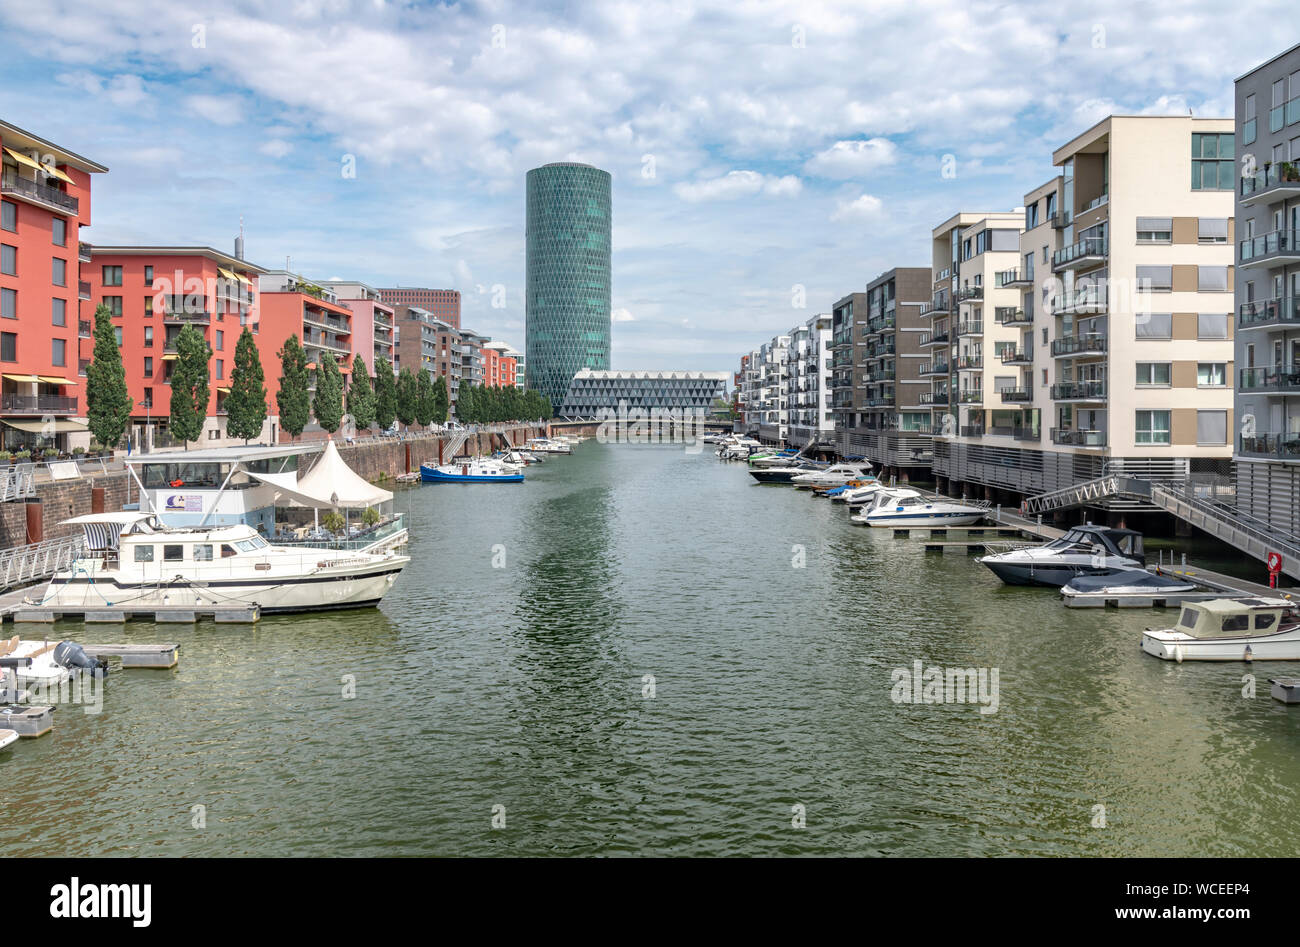 The Westhafen district of Frankfurt. In this area are the harbour and marina, Westhafen Tower is the tallest building also known as das Gerippte. Stock Photo